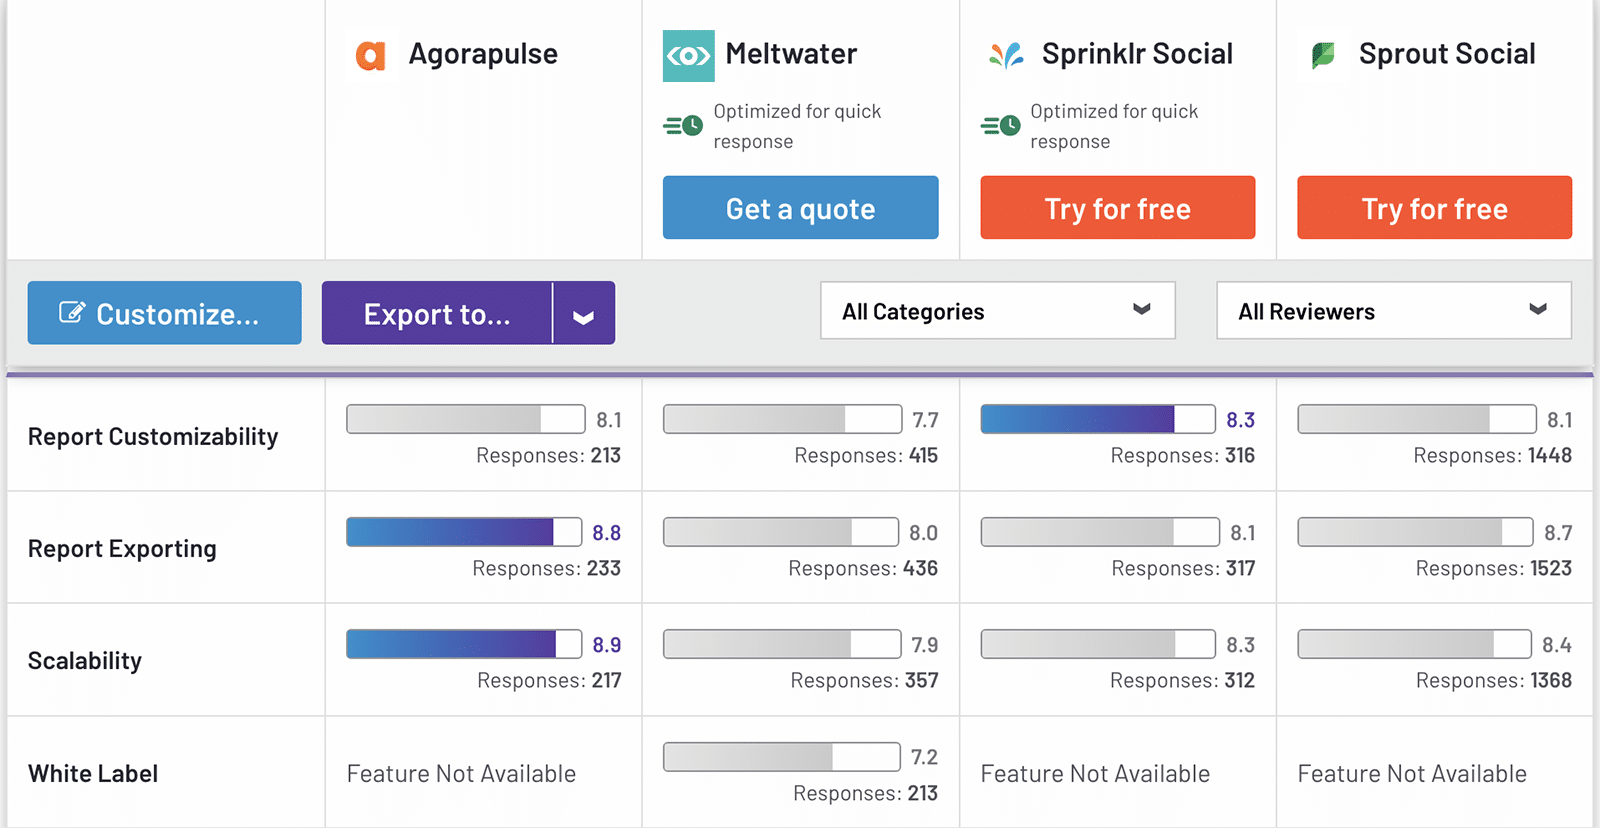 G2 comparison between Agorapulse, Meltwater, Sprinklr, and Sprout Social showing reporting